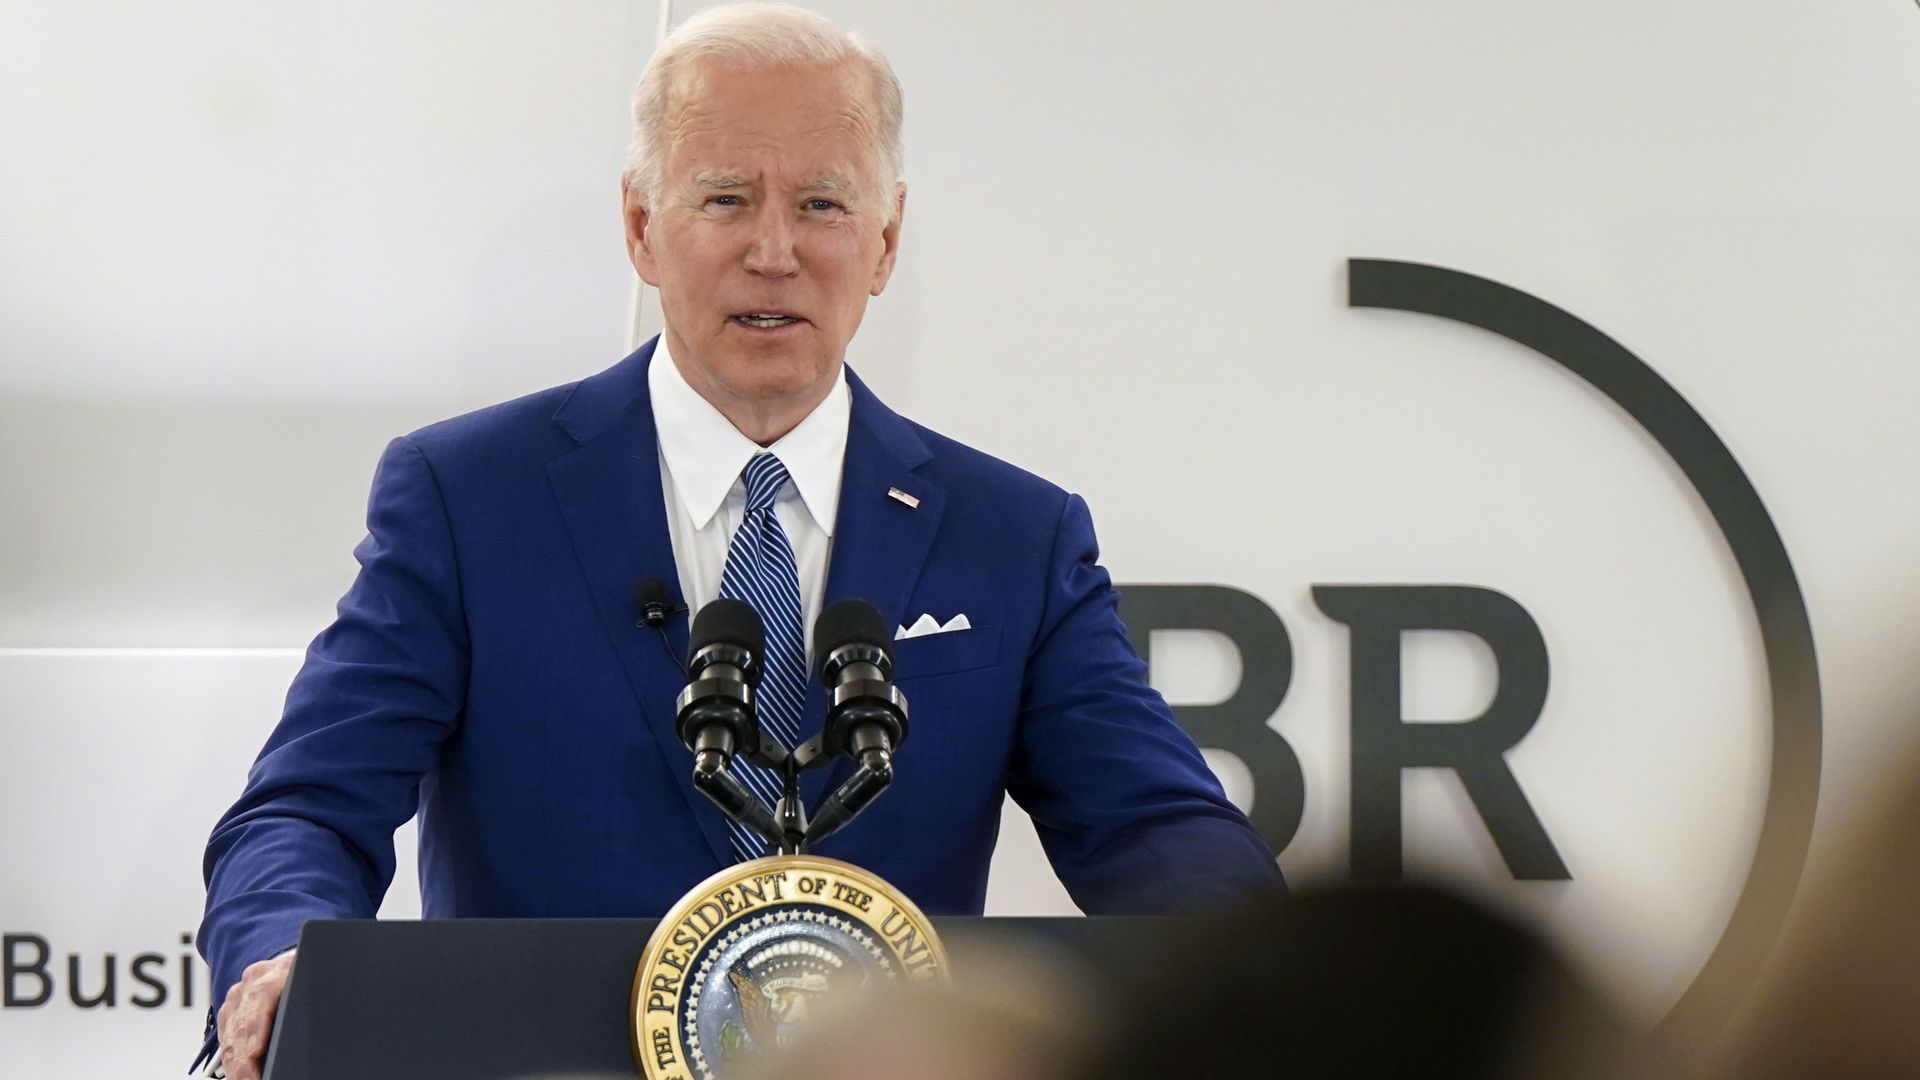  President Joe Biden speaks while joining the Business Roundtable's chief executive officer quarterly meeting in Washington, D.C., U.S., on Monday, March 21.